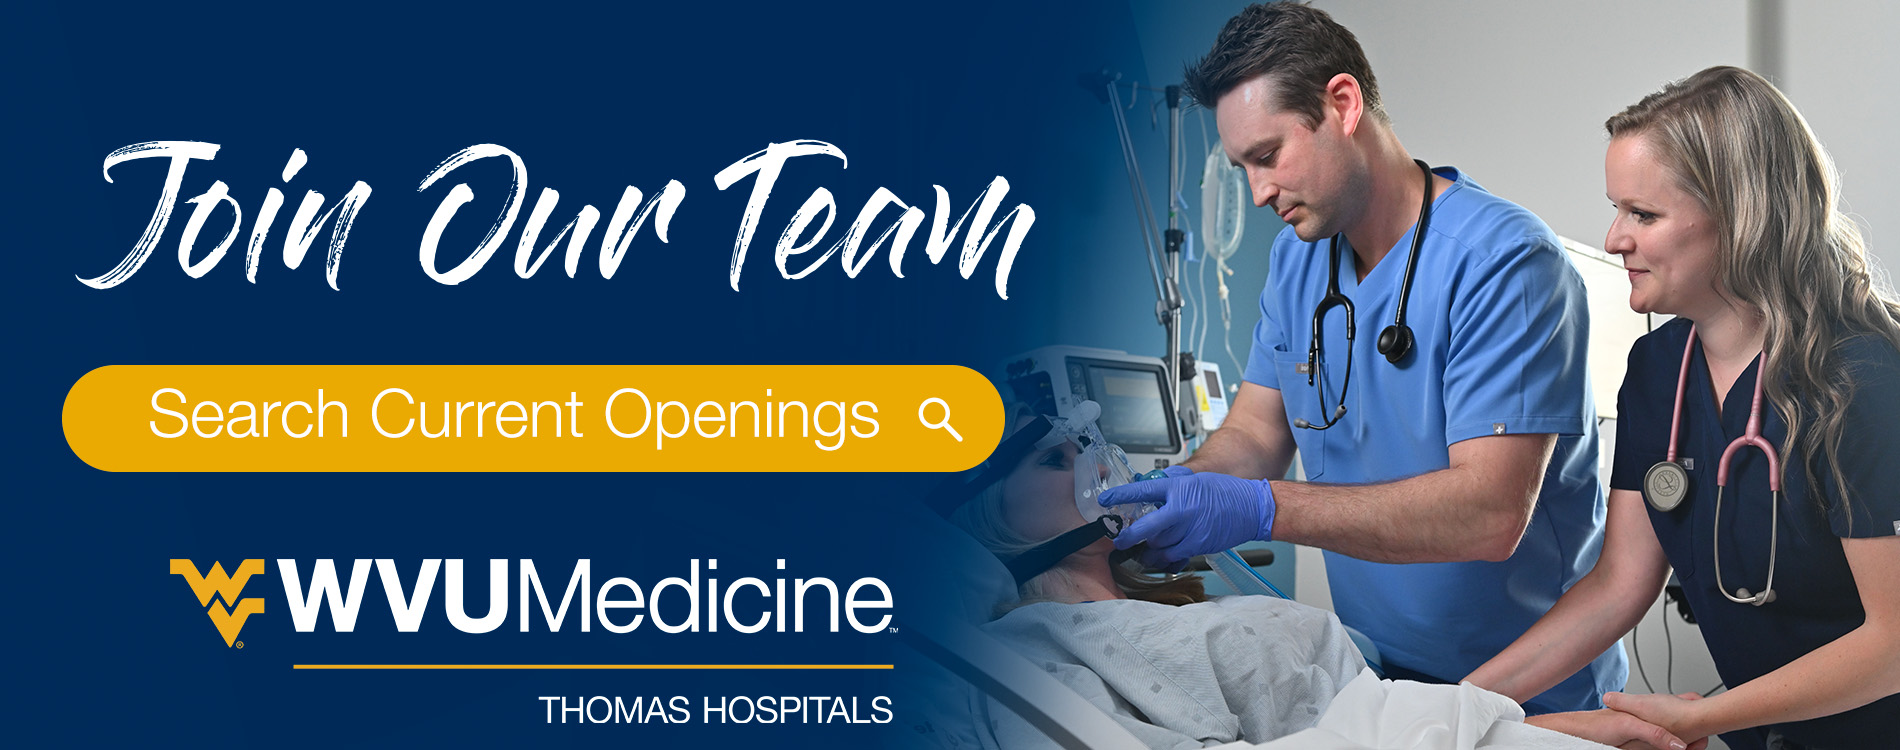 Join Our Team Search current openings header image